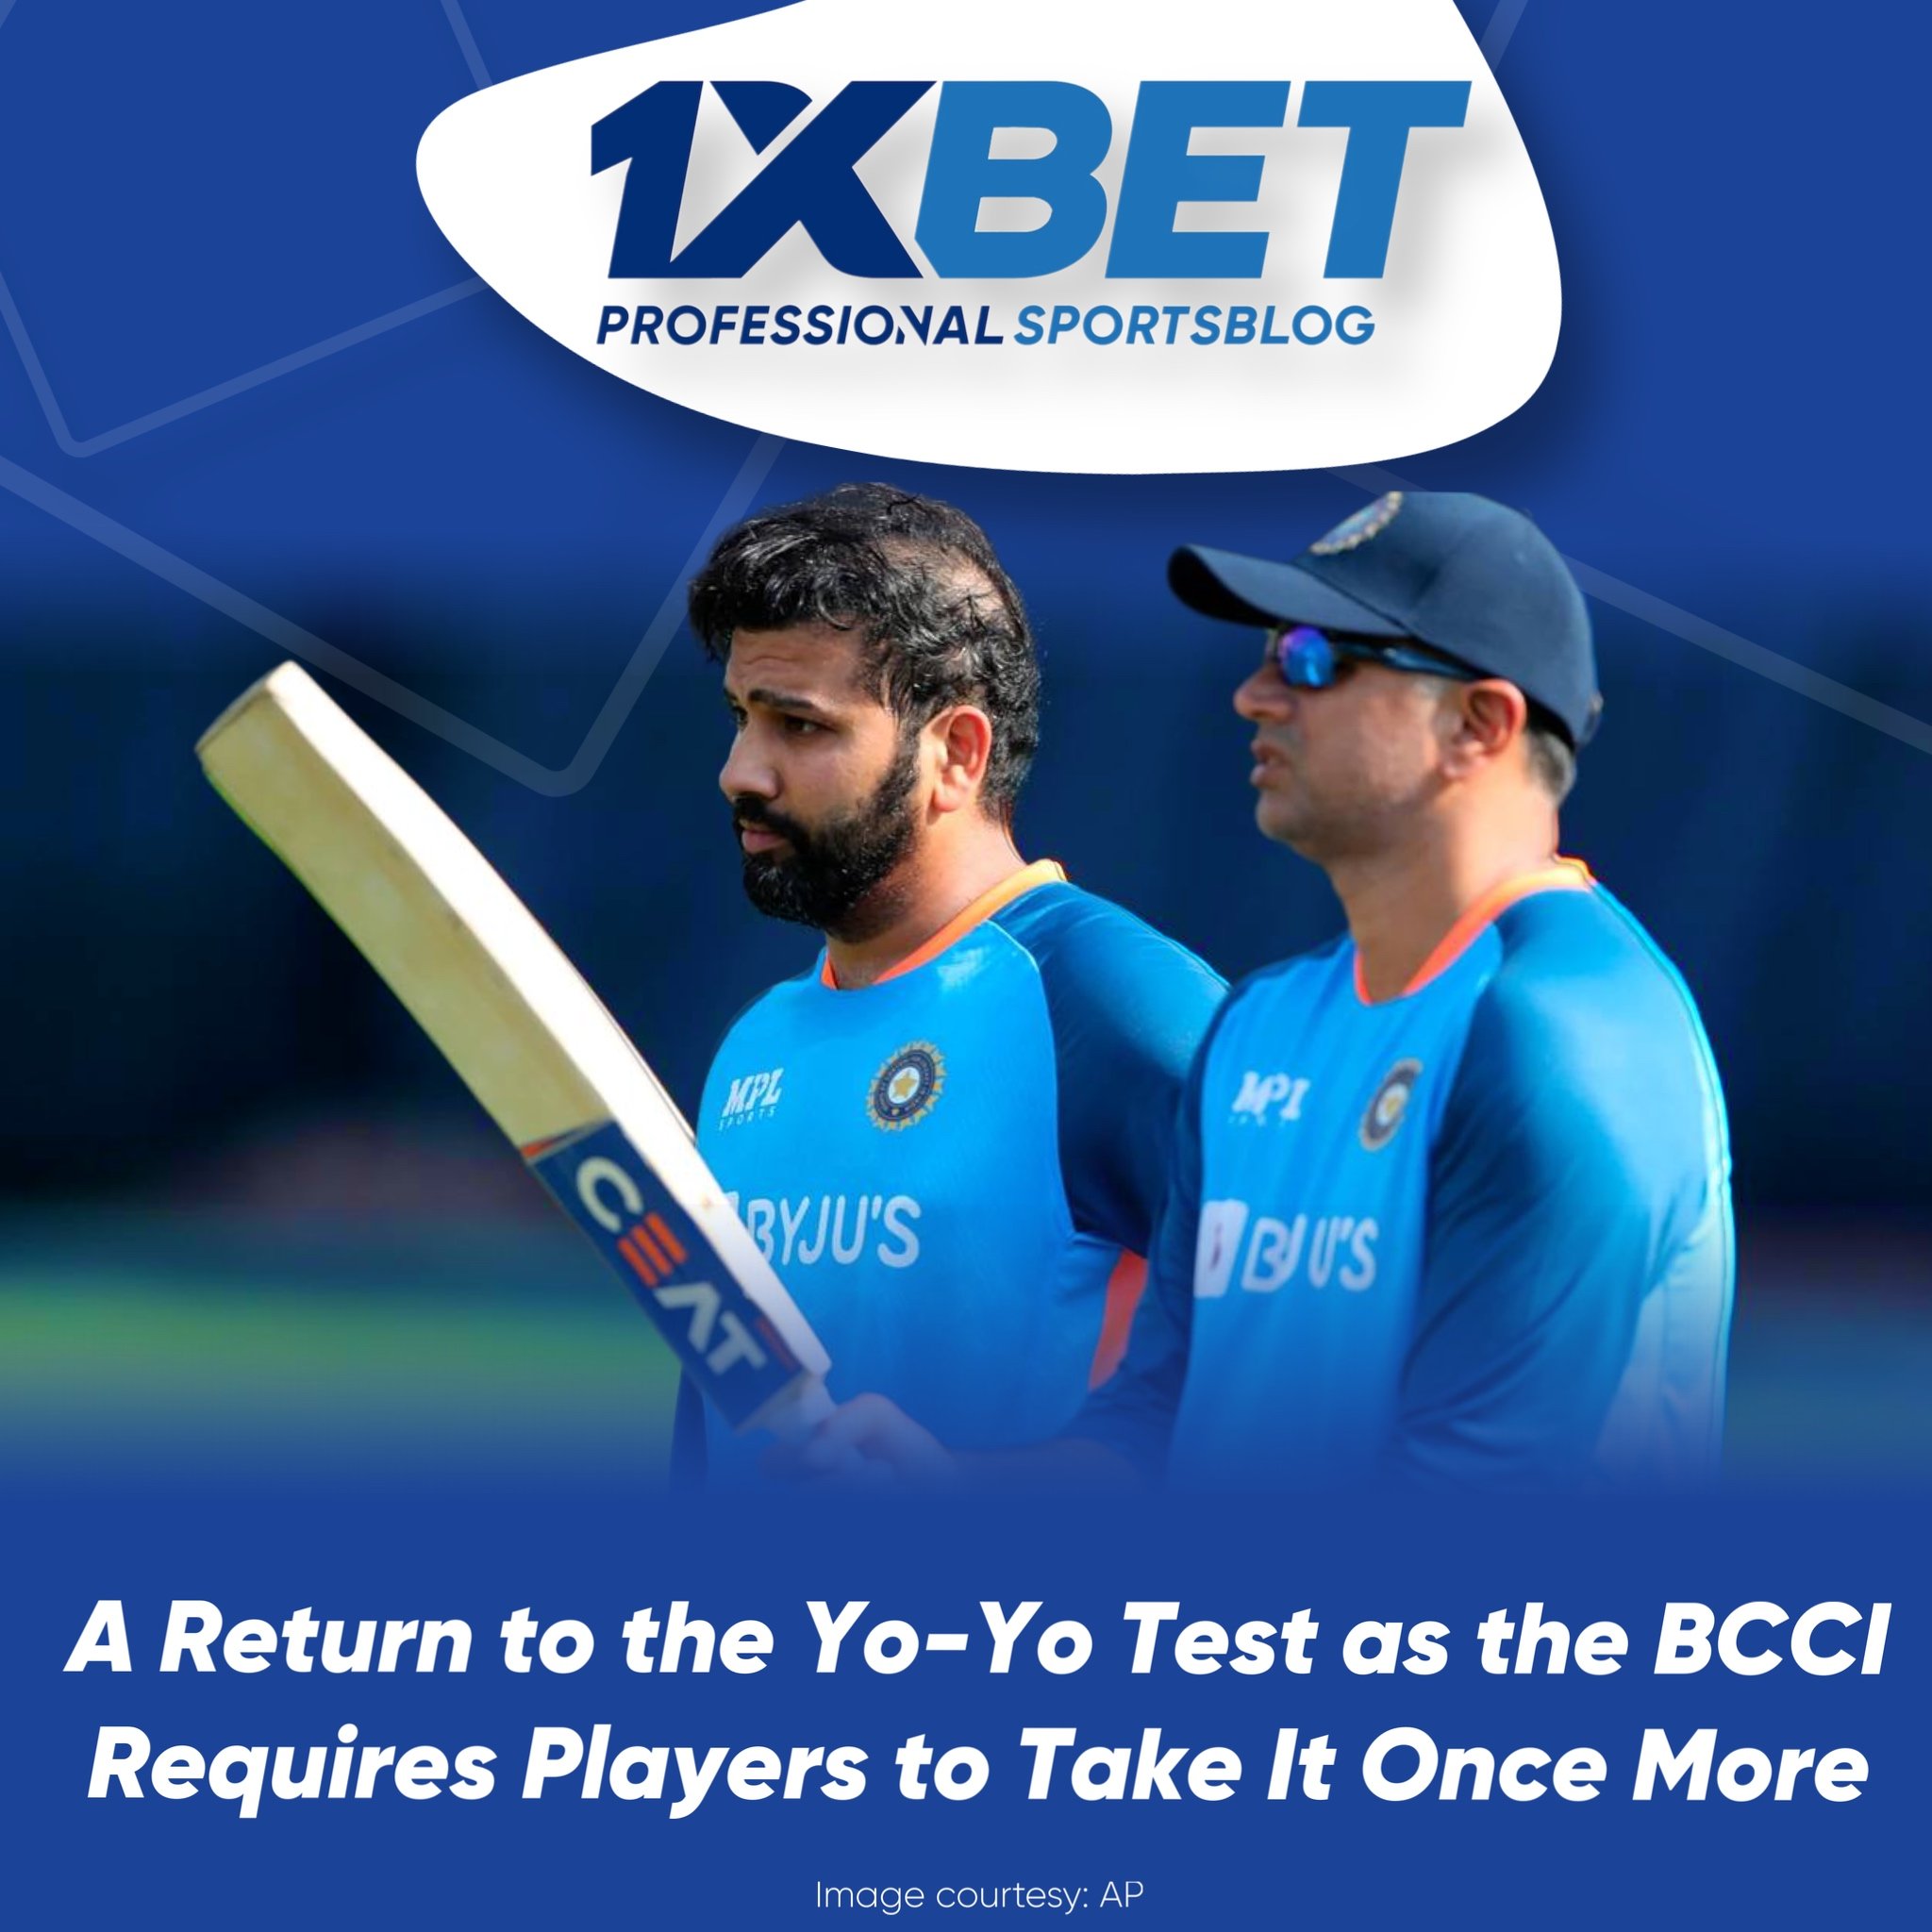 A Return to the Yo-Yo Test as the BCCI Requires Players to Take It Once More